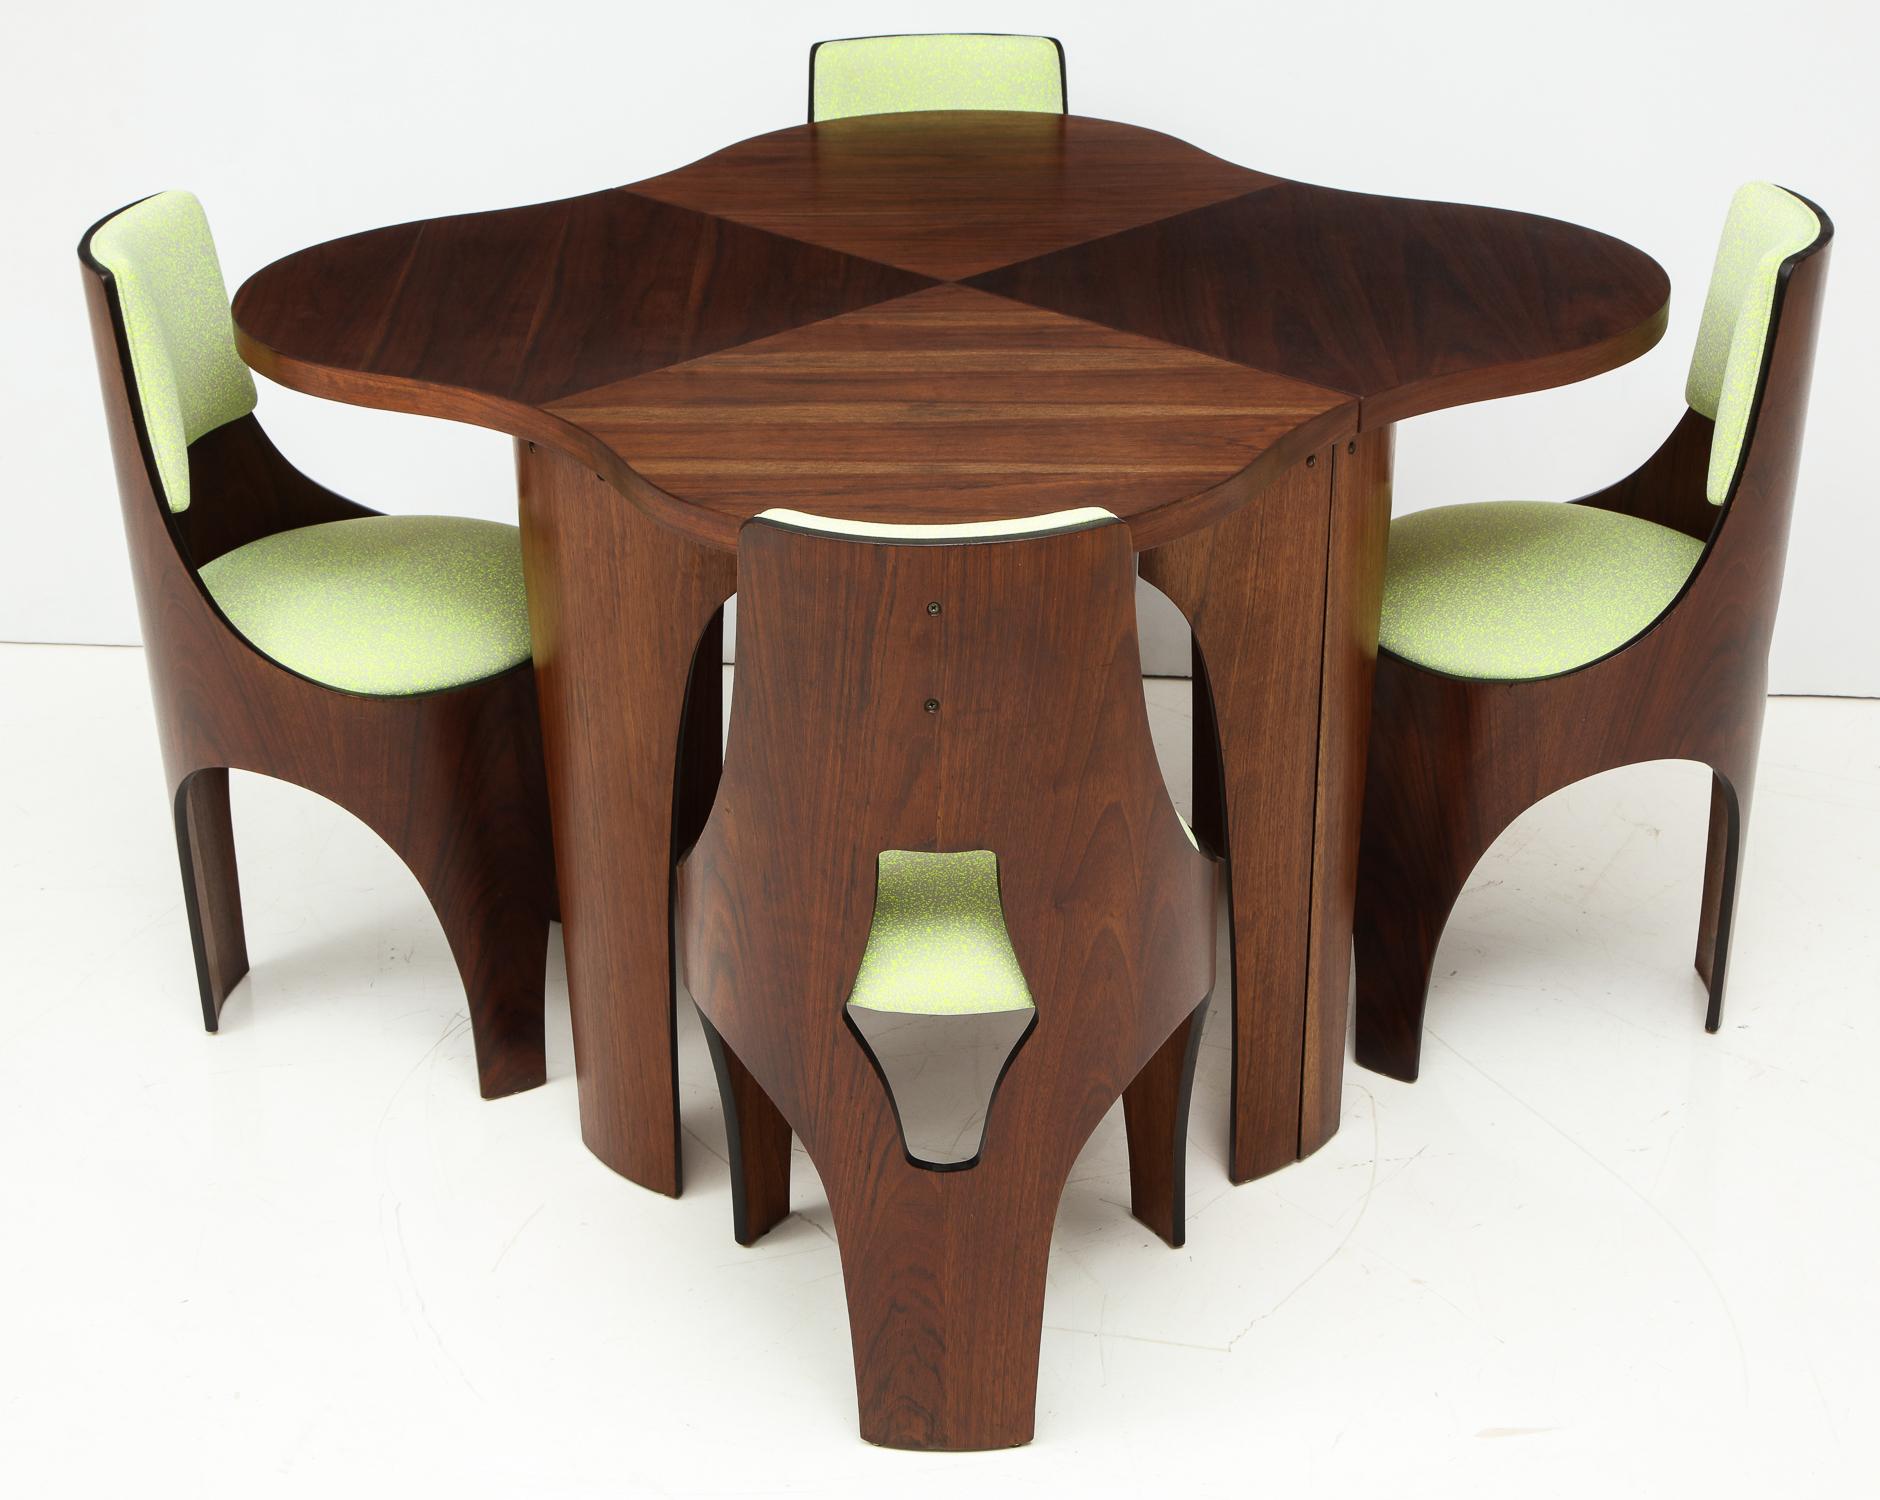 Table and four chairs of walnut and walnut plywood from the Cylindra line designed by Henry Glass and produced by Richbilt Mfg, circa 1966. Born in Vienna and trained in Industrial design and architecture there, Glass emigrated to the U.S. in 1939,